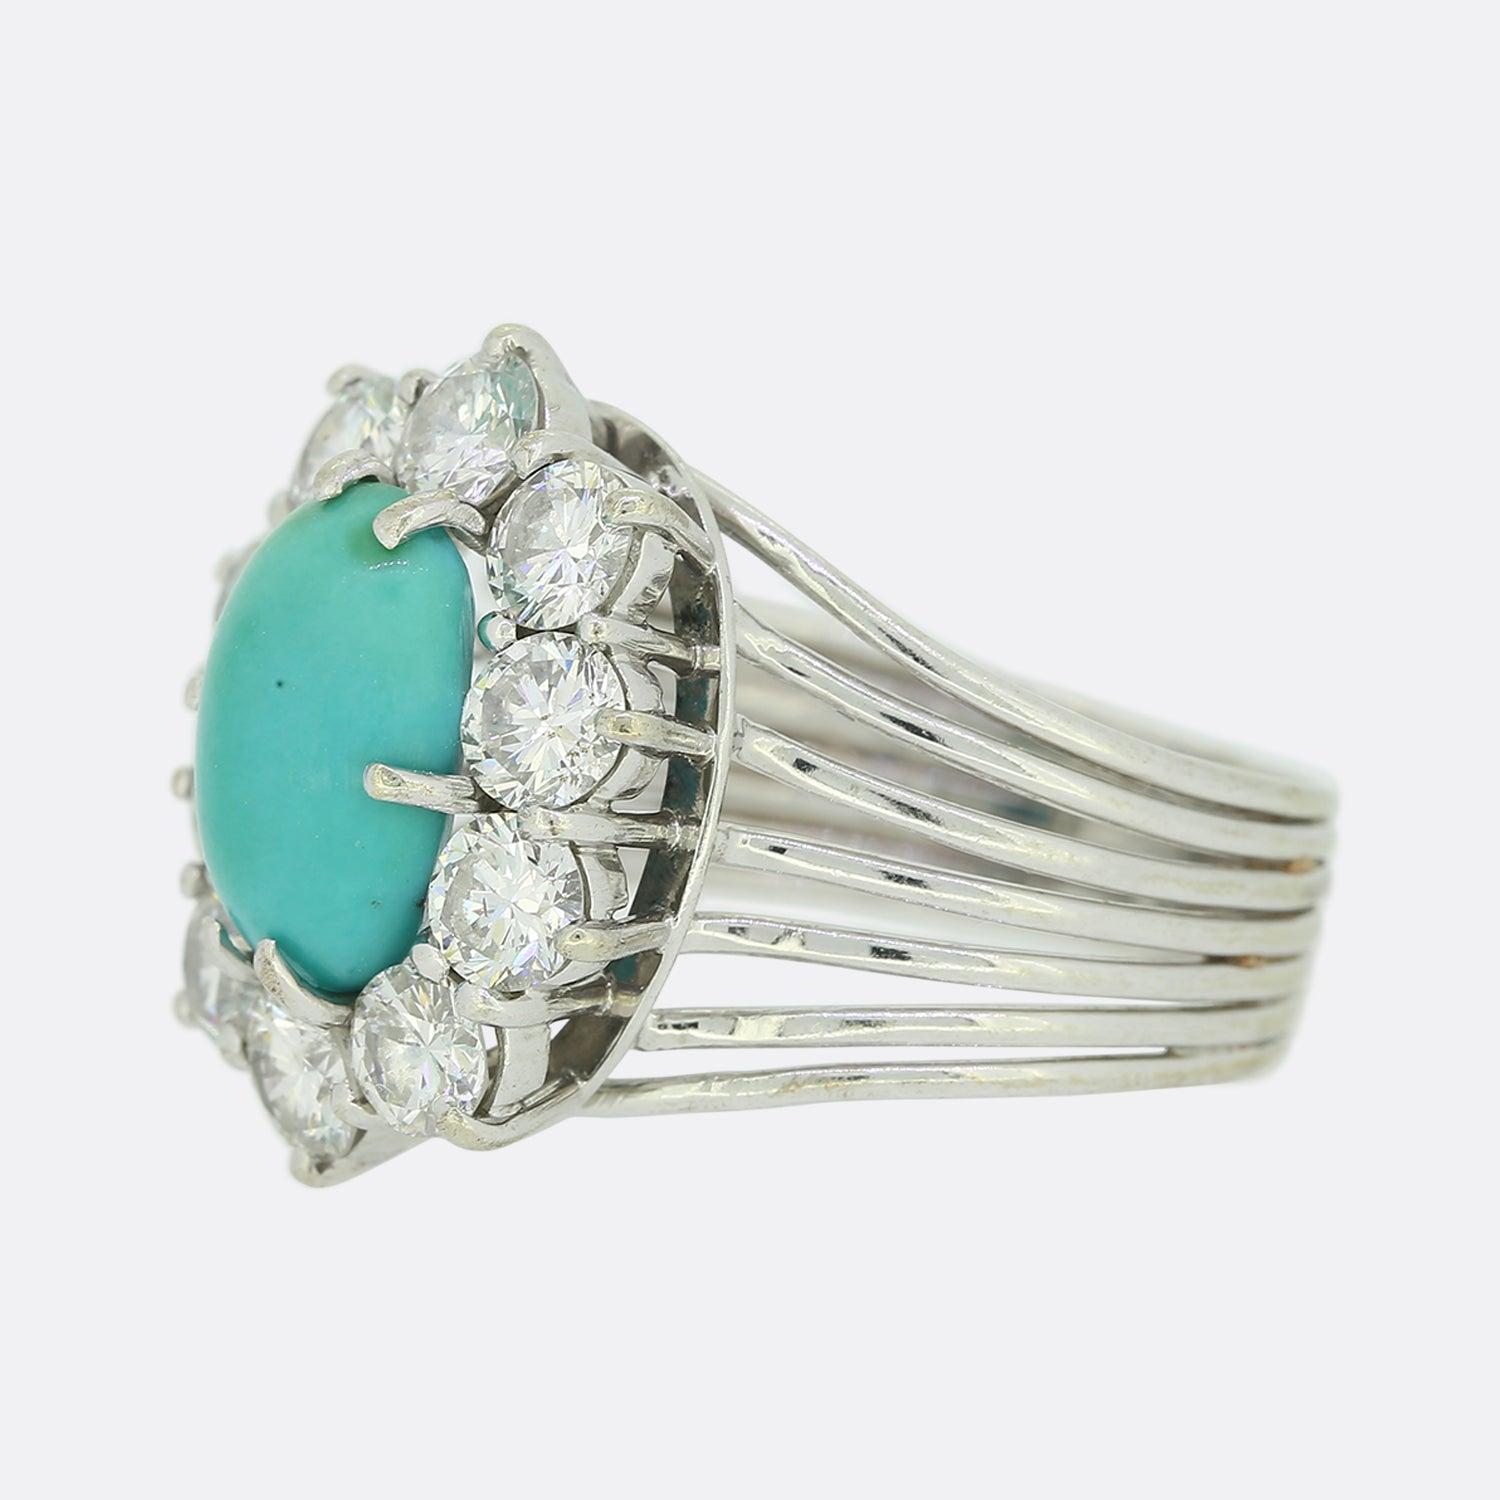 This is a vintage 18ct white gold turquoise and diamond cluster ring. The ring dates back to the 1980s and features a ribbed band and excellent quality diamonds.

Condition: Used (Very Good)
Weight: 5.0 grams
Size: K 1/2 (51)
Face Dimensions: 17mm x